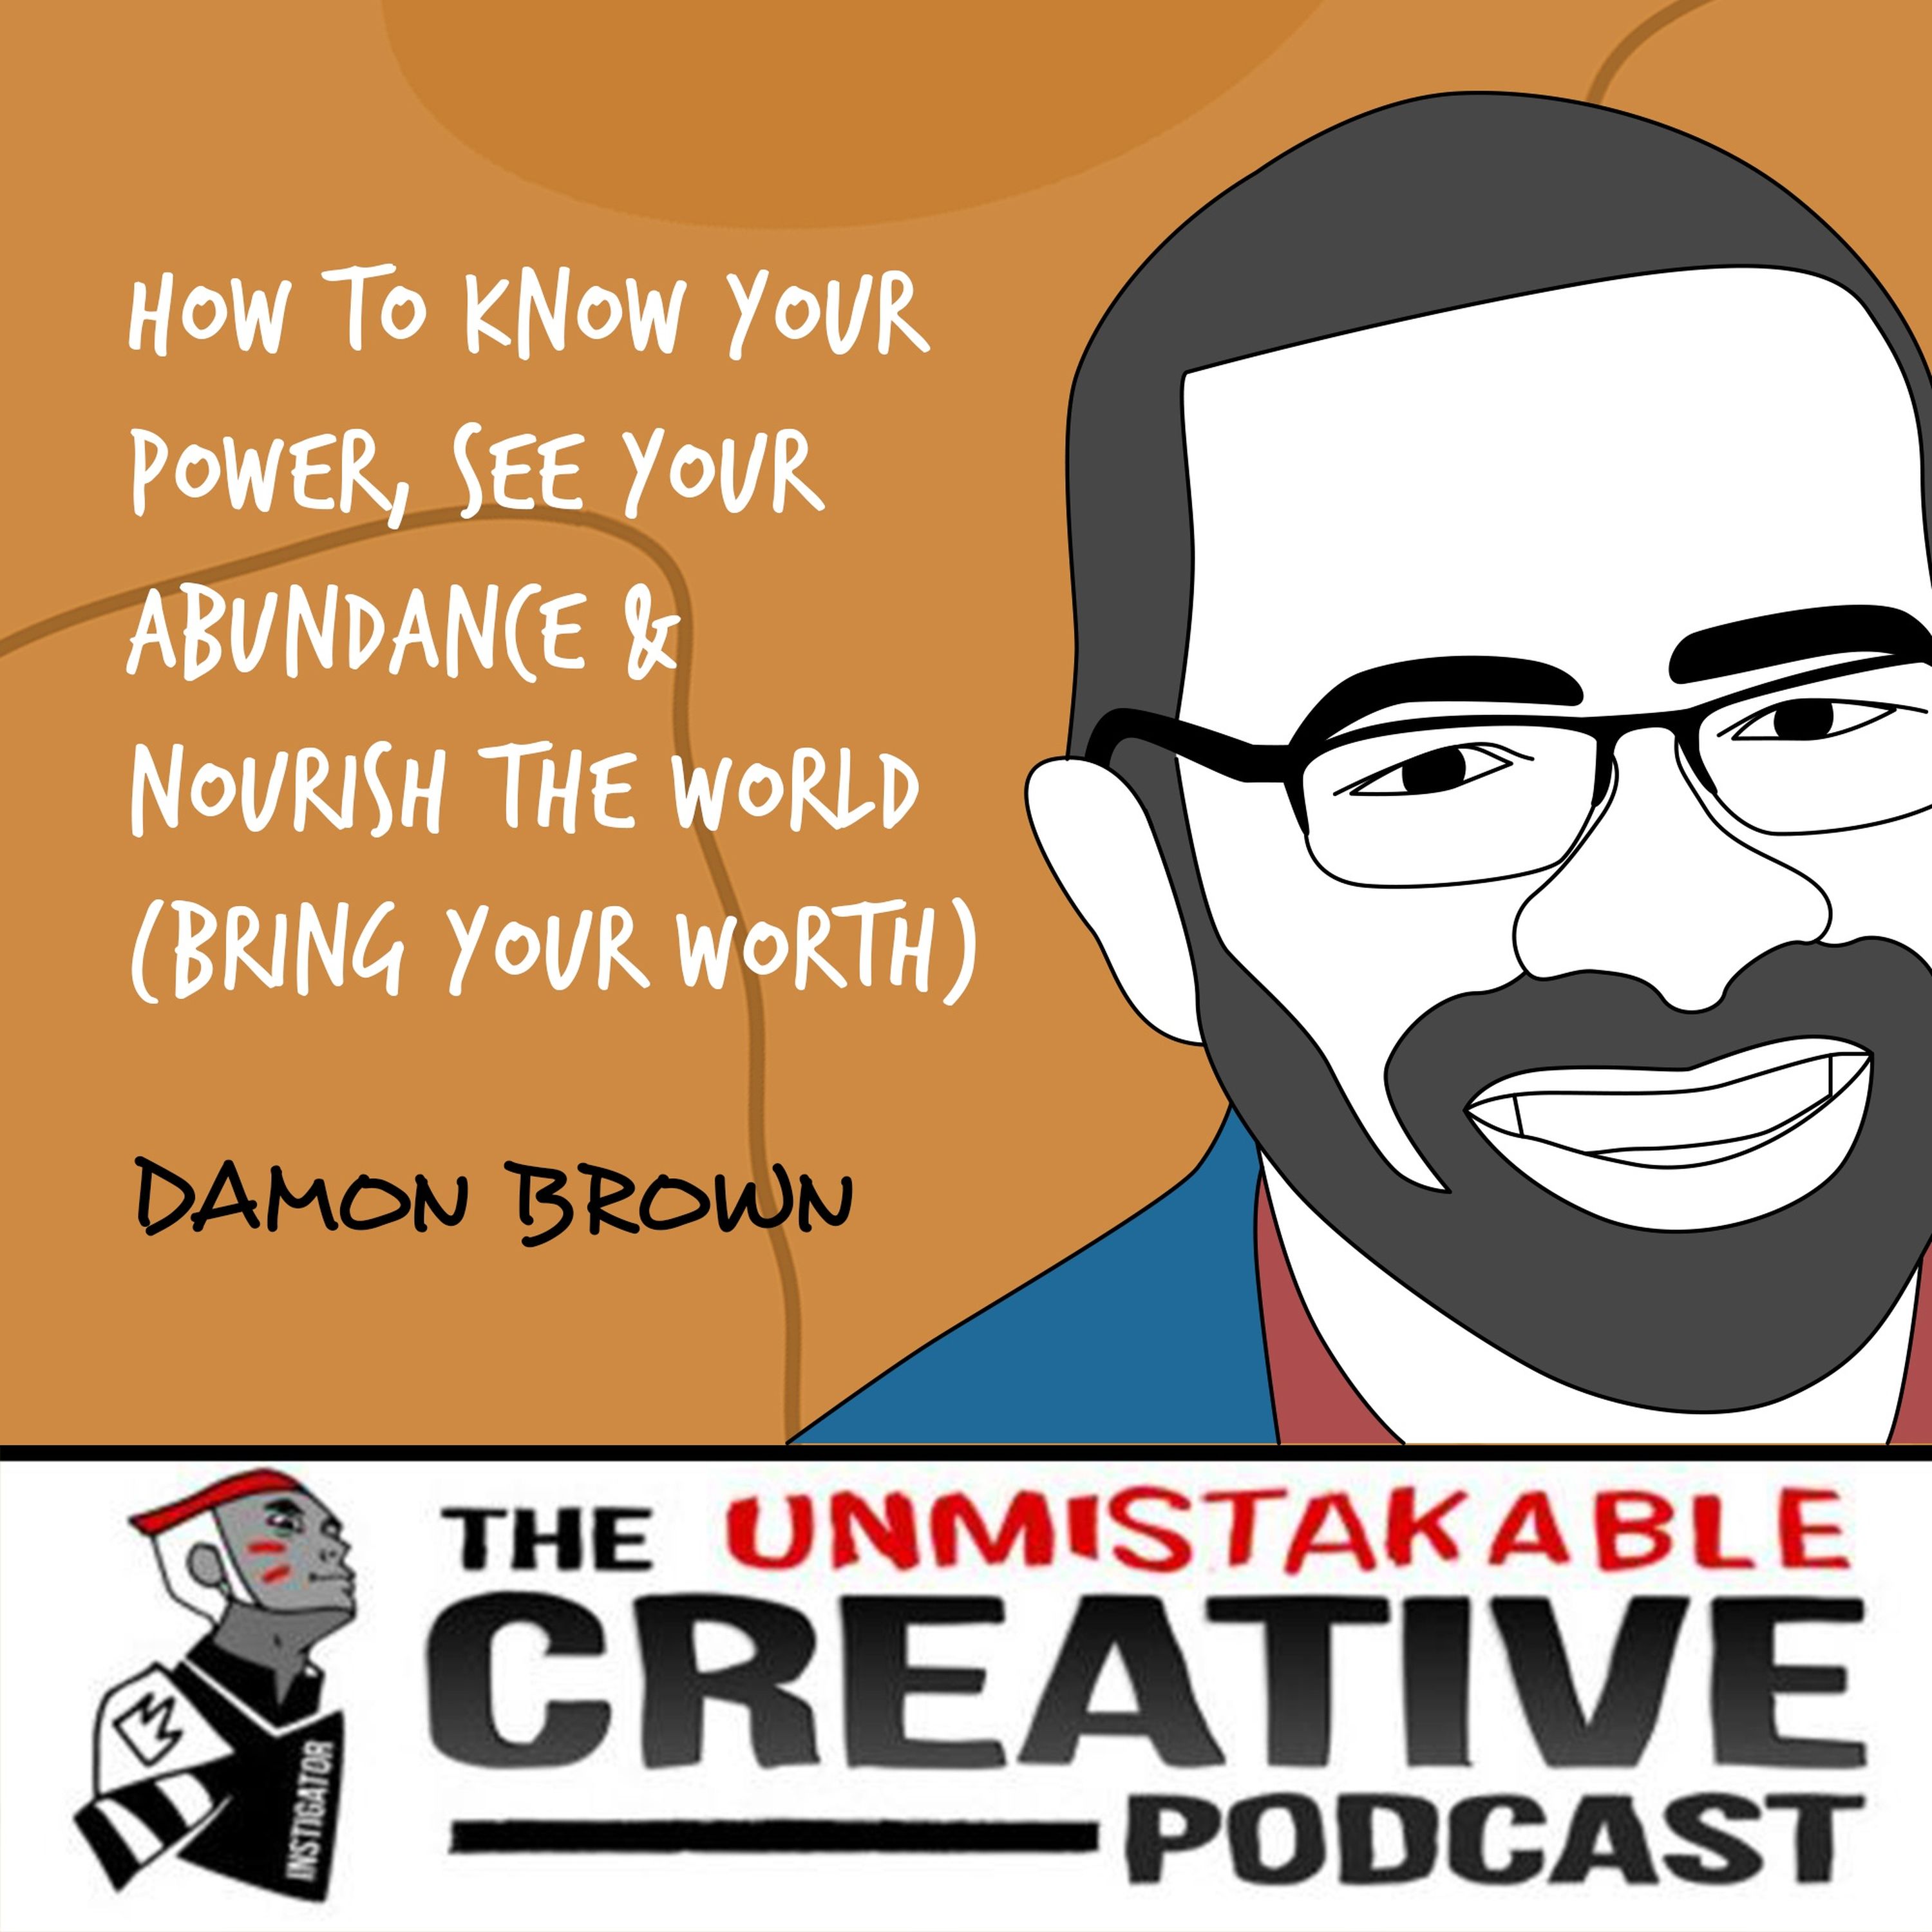 Damon Brown | How to Know Your Power, See Your Abundance & Nourish the World Image